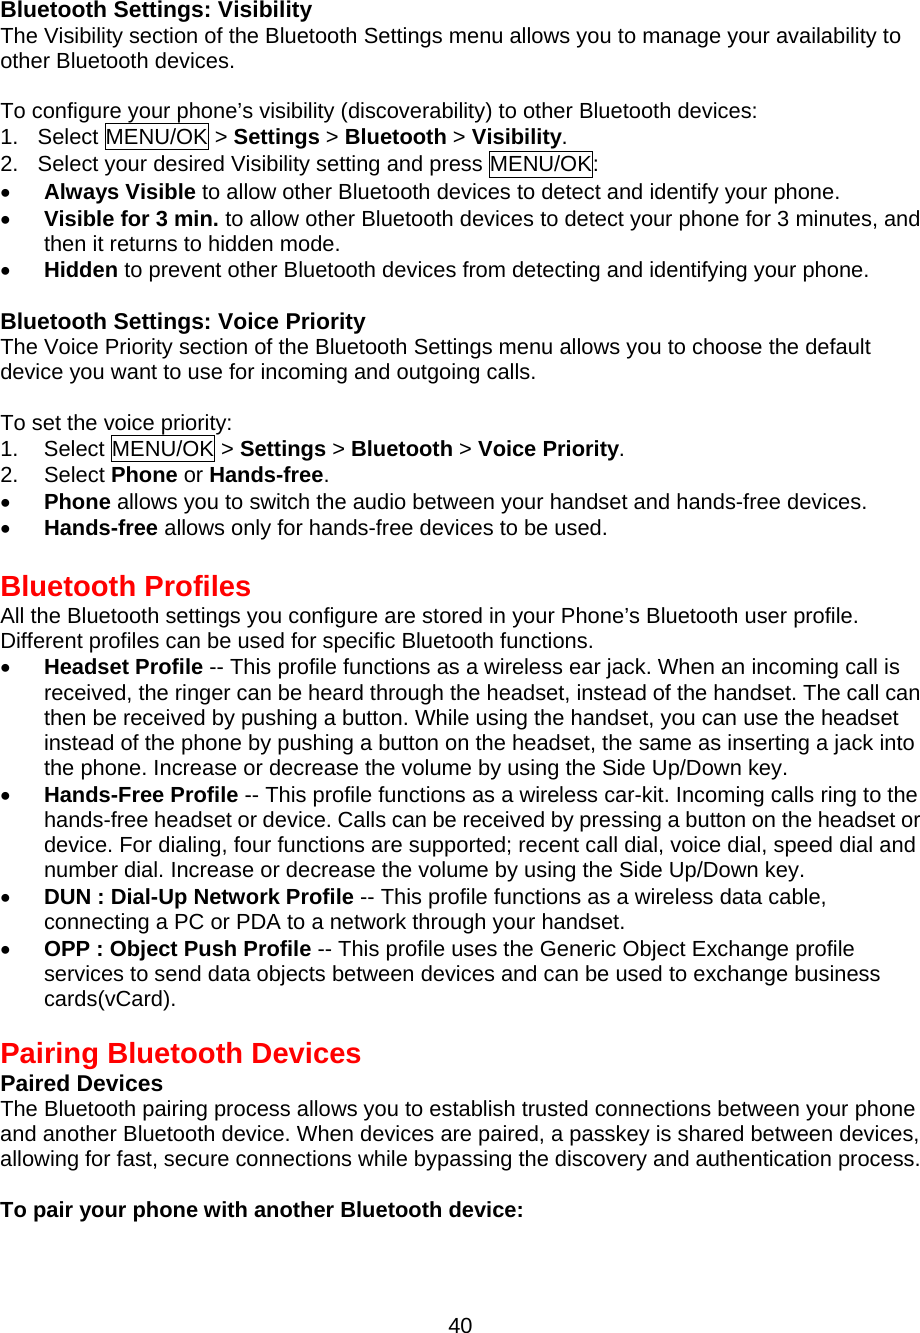  Bluetooth Settings: Visibility The Visibility section of the Bluetooth Settings menu allows you to manage your availability to other Bluetooth devices.  To configure your phone’s visibility (discoverability) to other Bluetooth devices: 1. Select MENU/OK &gt; Settings &gt; Bluetooth &gt; Visibility. 2.  Select your desired Visibility setting and press MENU/OK: •  Always Visible to allow other Bluetooth devices to detect and identify your phone. •  Visible for 3 min. to allow other Bluetooth devices to detect your phone for 3 minutes, and then it returns to hidden mode. •  Hidden to prevent other Bluetooth devices from detecting and identifying your phone.   Bluetooth Settings: Voice Priority The Voice Priority section of the Bluetooth Settings menu allows you to choose the default device you want to use for incoming and outgoing calls.  To set the voice priority: 1. Select MENU/OK &gt; Settings &gt; Bluetooth &gt; Voice Priority. 2. Select Phone or Hands-free. •  Phone allows you to switch the audio between your handset and hands-free devices. •  Hands-free allows only for hands-free devices to be used.  Bluetooth Profiles All the Bluetooth settings you configure are stored in your Phone’s Bluetooth user profile. Different profiles can be used for specific Bluetooth functions. •  Headset Profile -- This profile functions as a wireless ear jack. When an incoming call is received, the ringer can be heard through the headset, instead of the handset. The call can then be received by pushing a button. While using the handset, you can use the headset instead of the phone by pushing a button on the headset, the same as inserting a jack into the phone. Increase or decrease the volume by using the Side Up/Down key.   •  Hands-Free Profile -- This profile functions as a wireless car-kit. Incoming calls ring to the hands-free headset or device. Calls can be received by pressing a button on the headset or device. For dialing, four functions are supported; recent call dial, voice dial, speed dial and number dial. Increase or decrease the volume by using the Side Up/Down key. •  DUN : Dial-Up Network Profile -- This profile functions as a wireless data cable,   connecting a PC or PDA to a network through your handset. •  OPP : Object Push Profile -- This profile uses the Generic Object Exchange profile services to send data objects between devices and can be used to exchange business cards(vCard).  Pairing Bluetooth Devices Paired Devices The Bluetooth pairing process allows you to establish trusted connections between your phone and another Bluetooth device. When devices are paired, a passkey is shared between devices, allowing for fast, secure connections while bypassing the discovery and authentication process.  To pair your phone with another Bluetooth device:  40